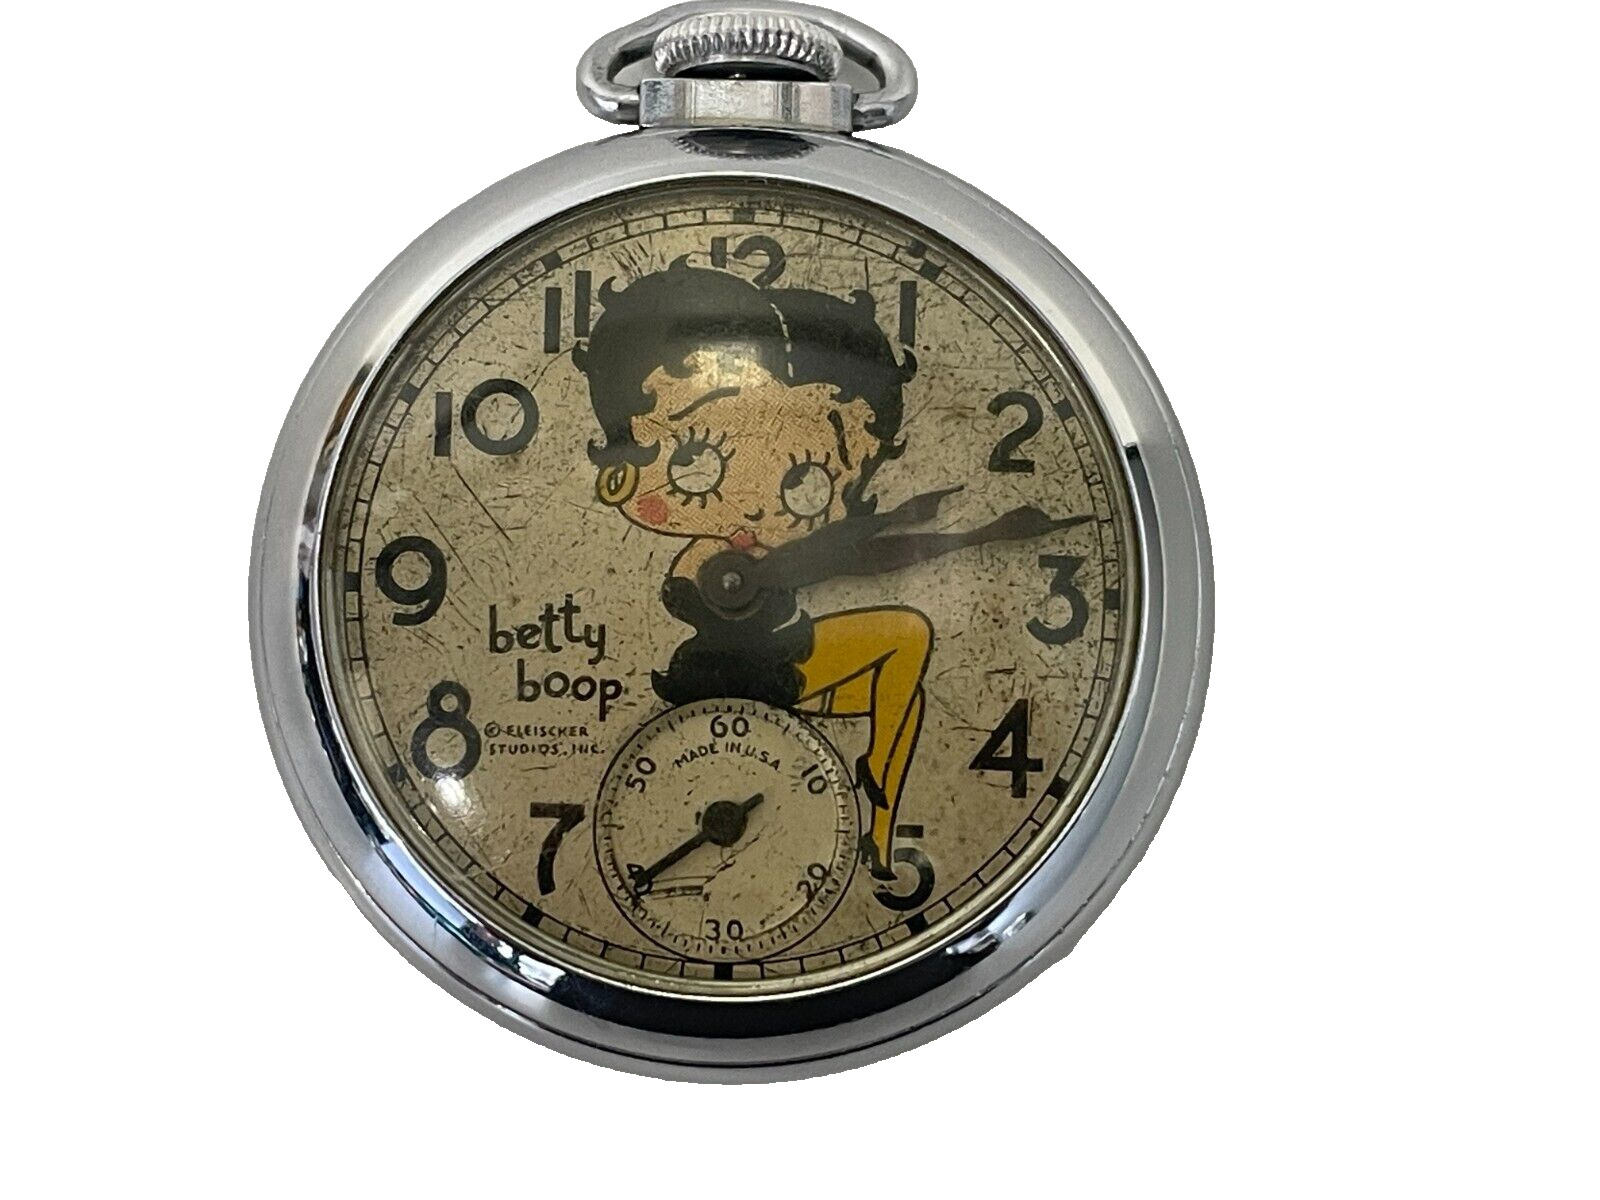 1934 Betty Boop character pocket watch  made by the Ingraham watch company.